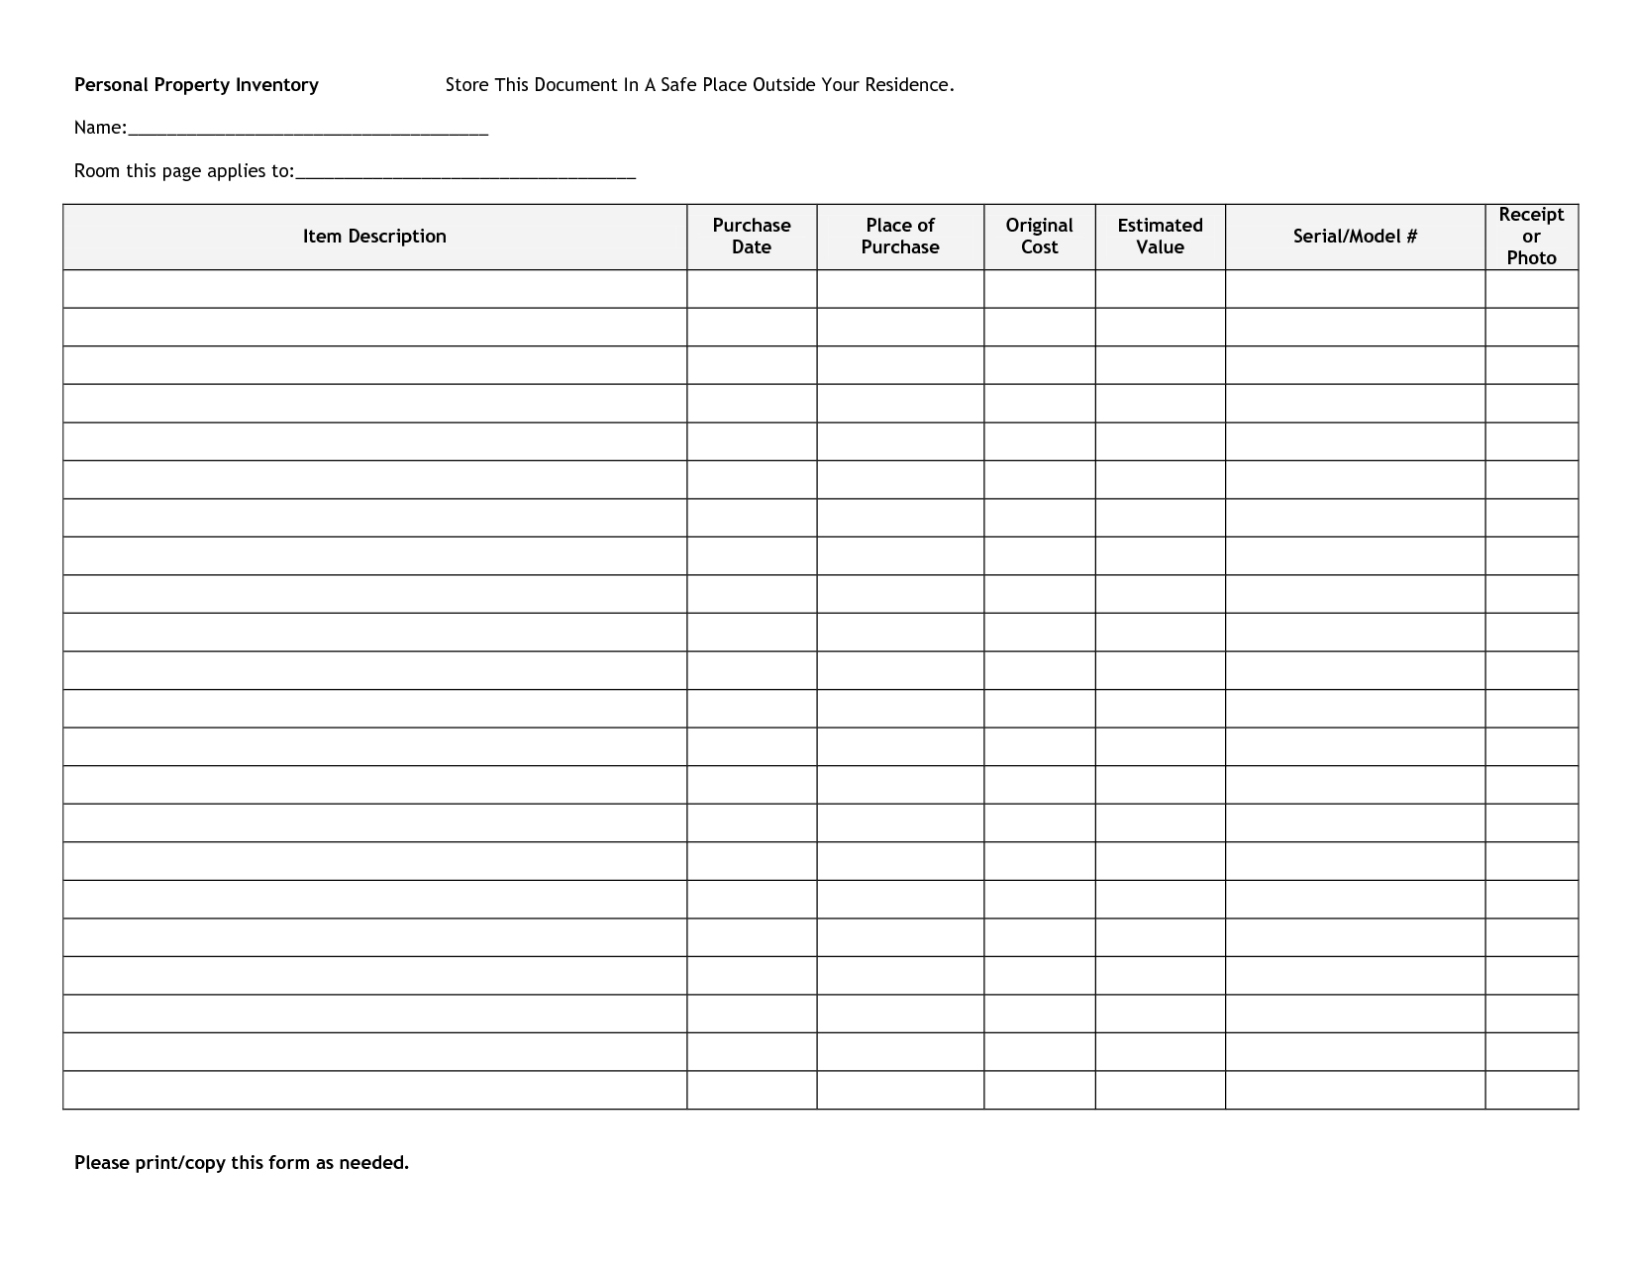 Personal Asset Inventory Spreadsheet Intended For Business Personal Inventory Tracking And Pertaining To Business Asset List Template